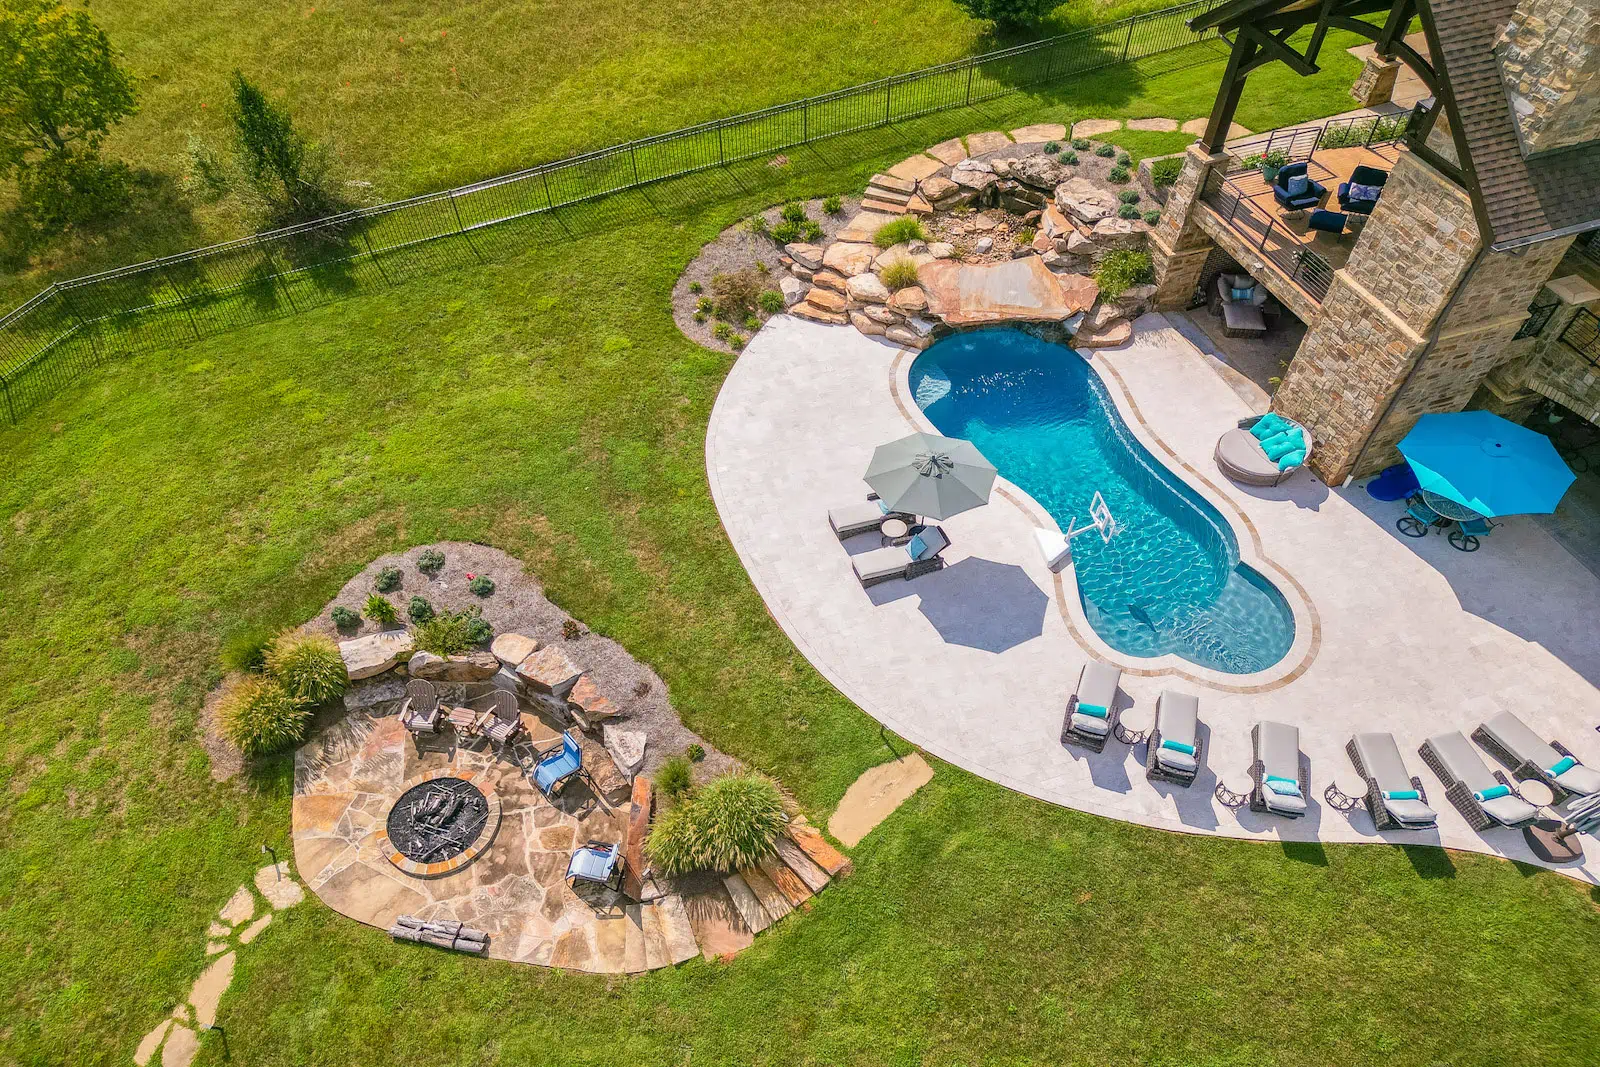 Leisure Pools Eclipse™ - let us install your pool in southwestern MO